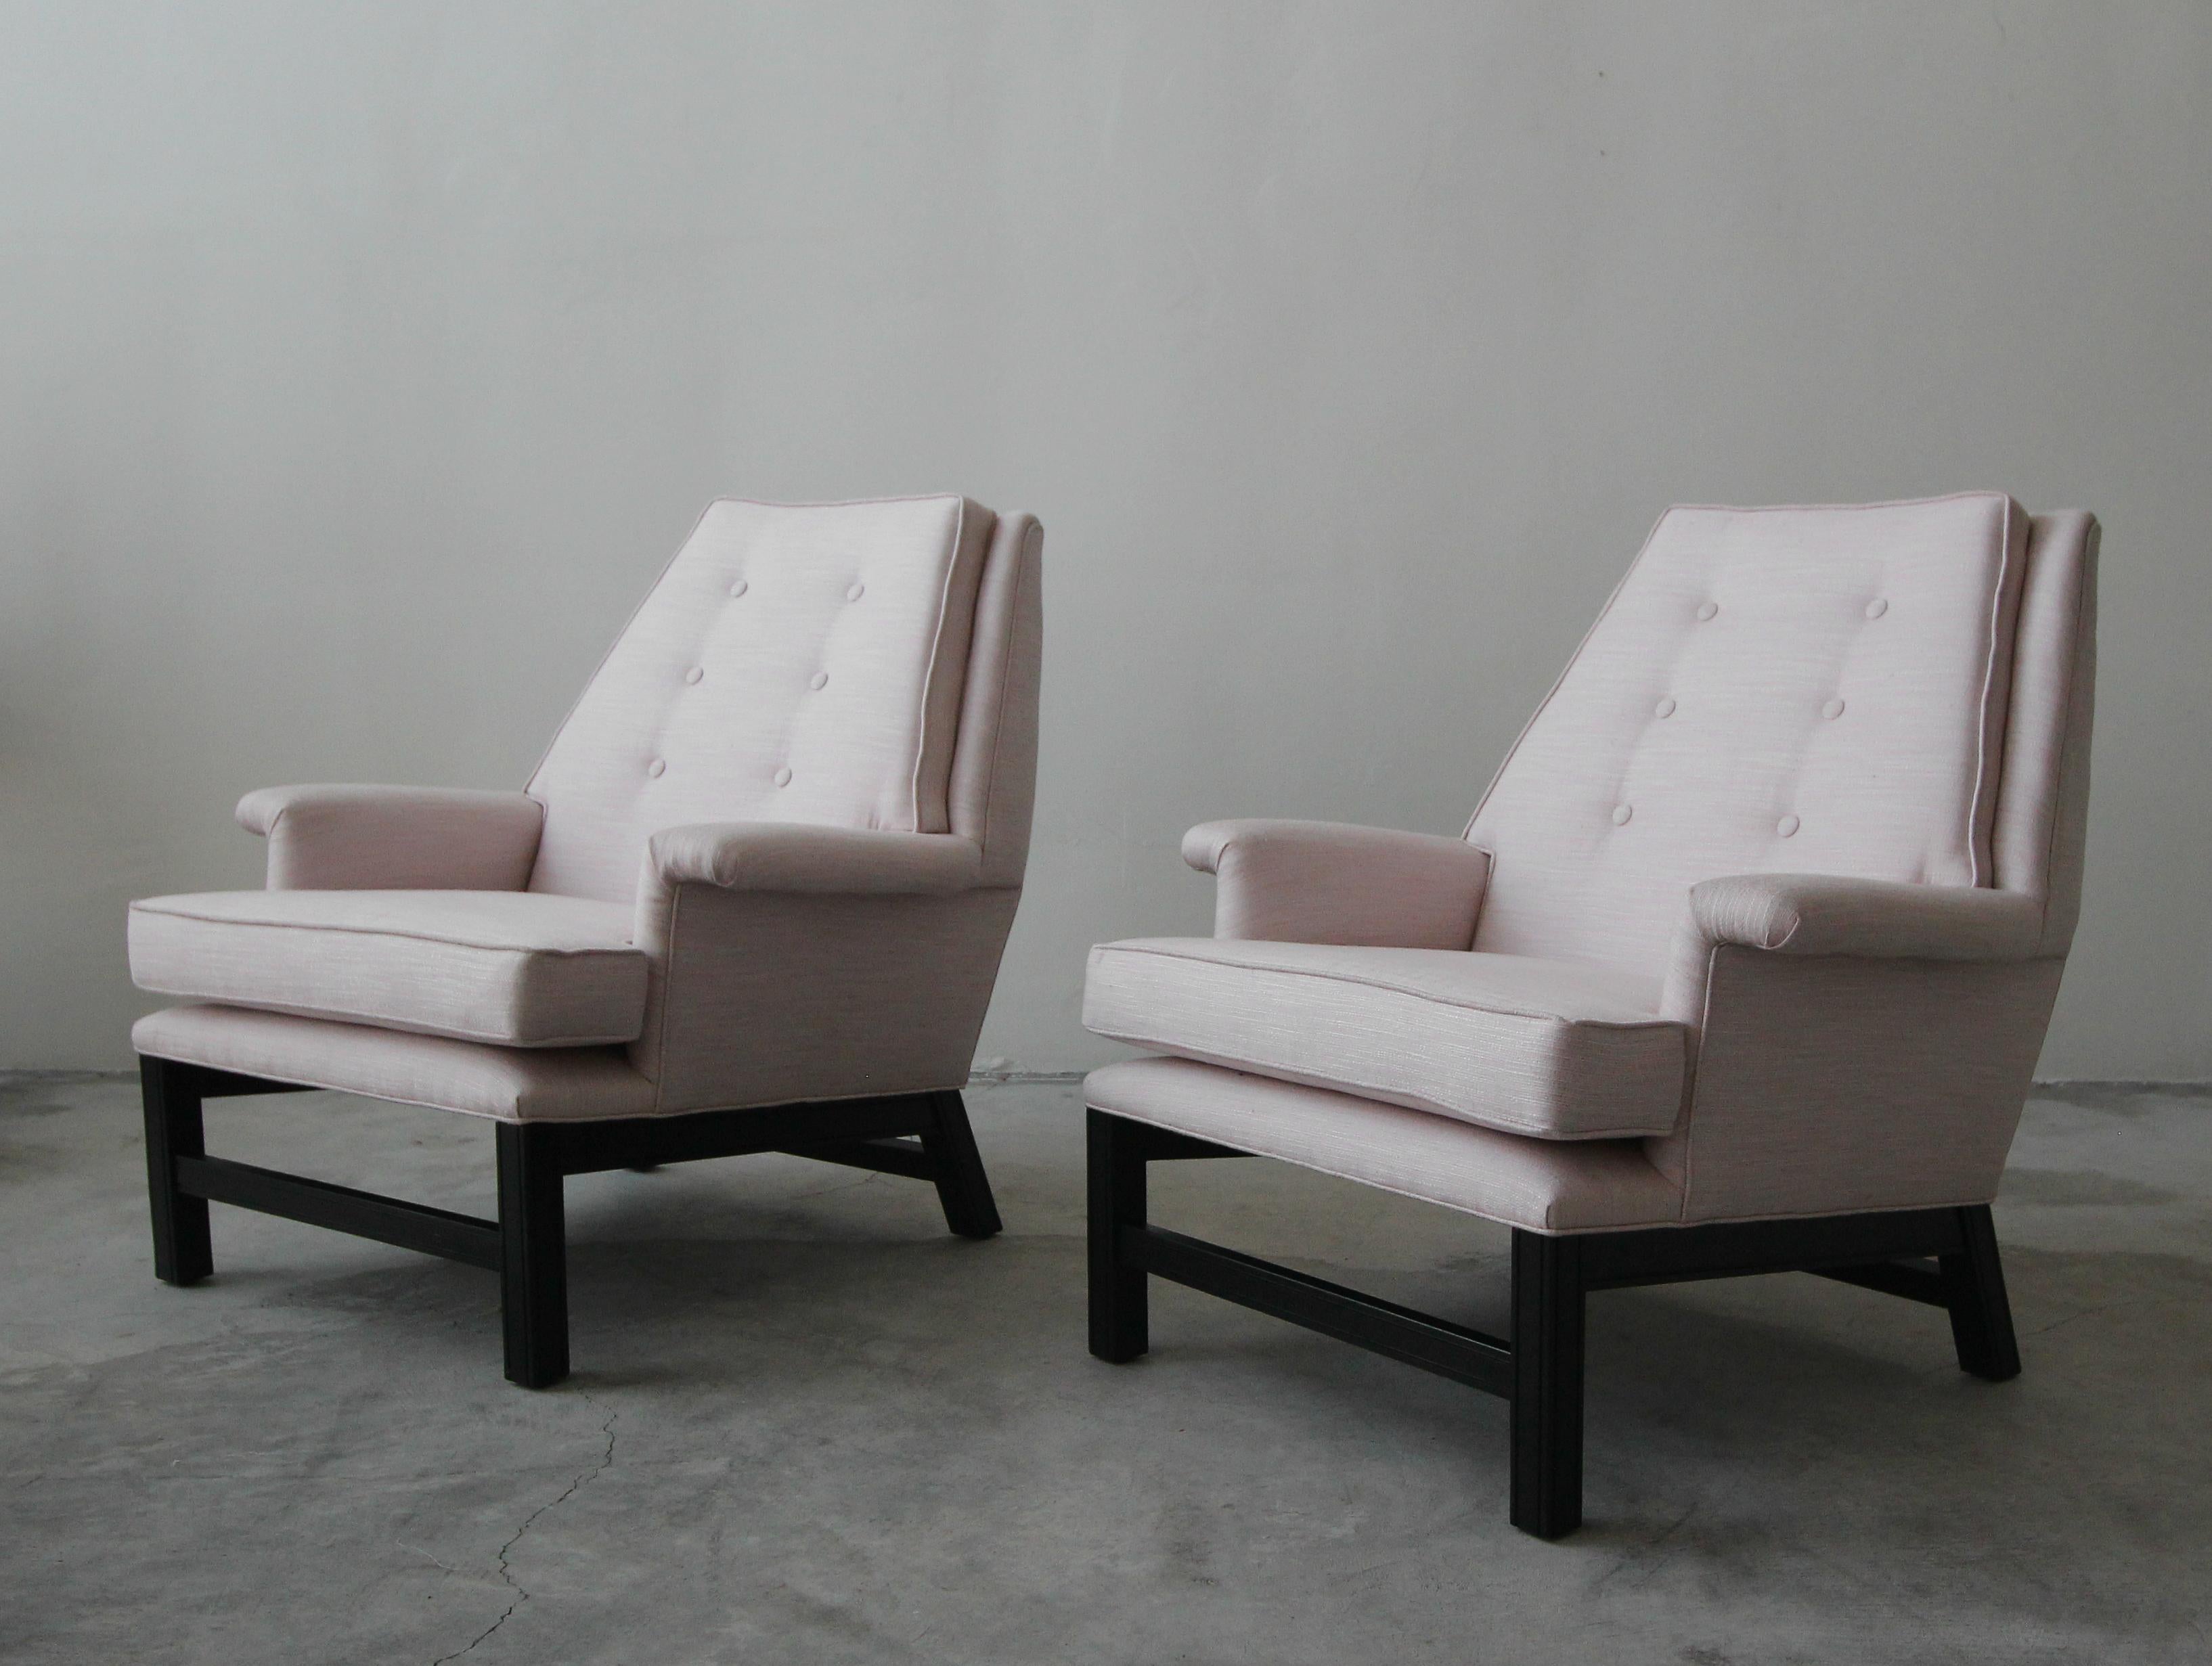 Absolutely stunning pair of midcentury lounge chairs. These chairs are wonderfully sized with a beautiful stature. The black bases create stunning contrast against the pale pink fabric.

The bases are solid and in good condition. The chairs have